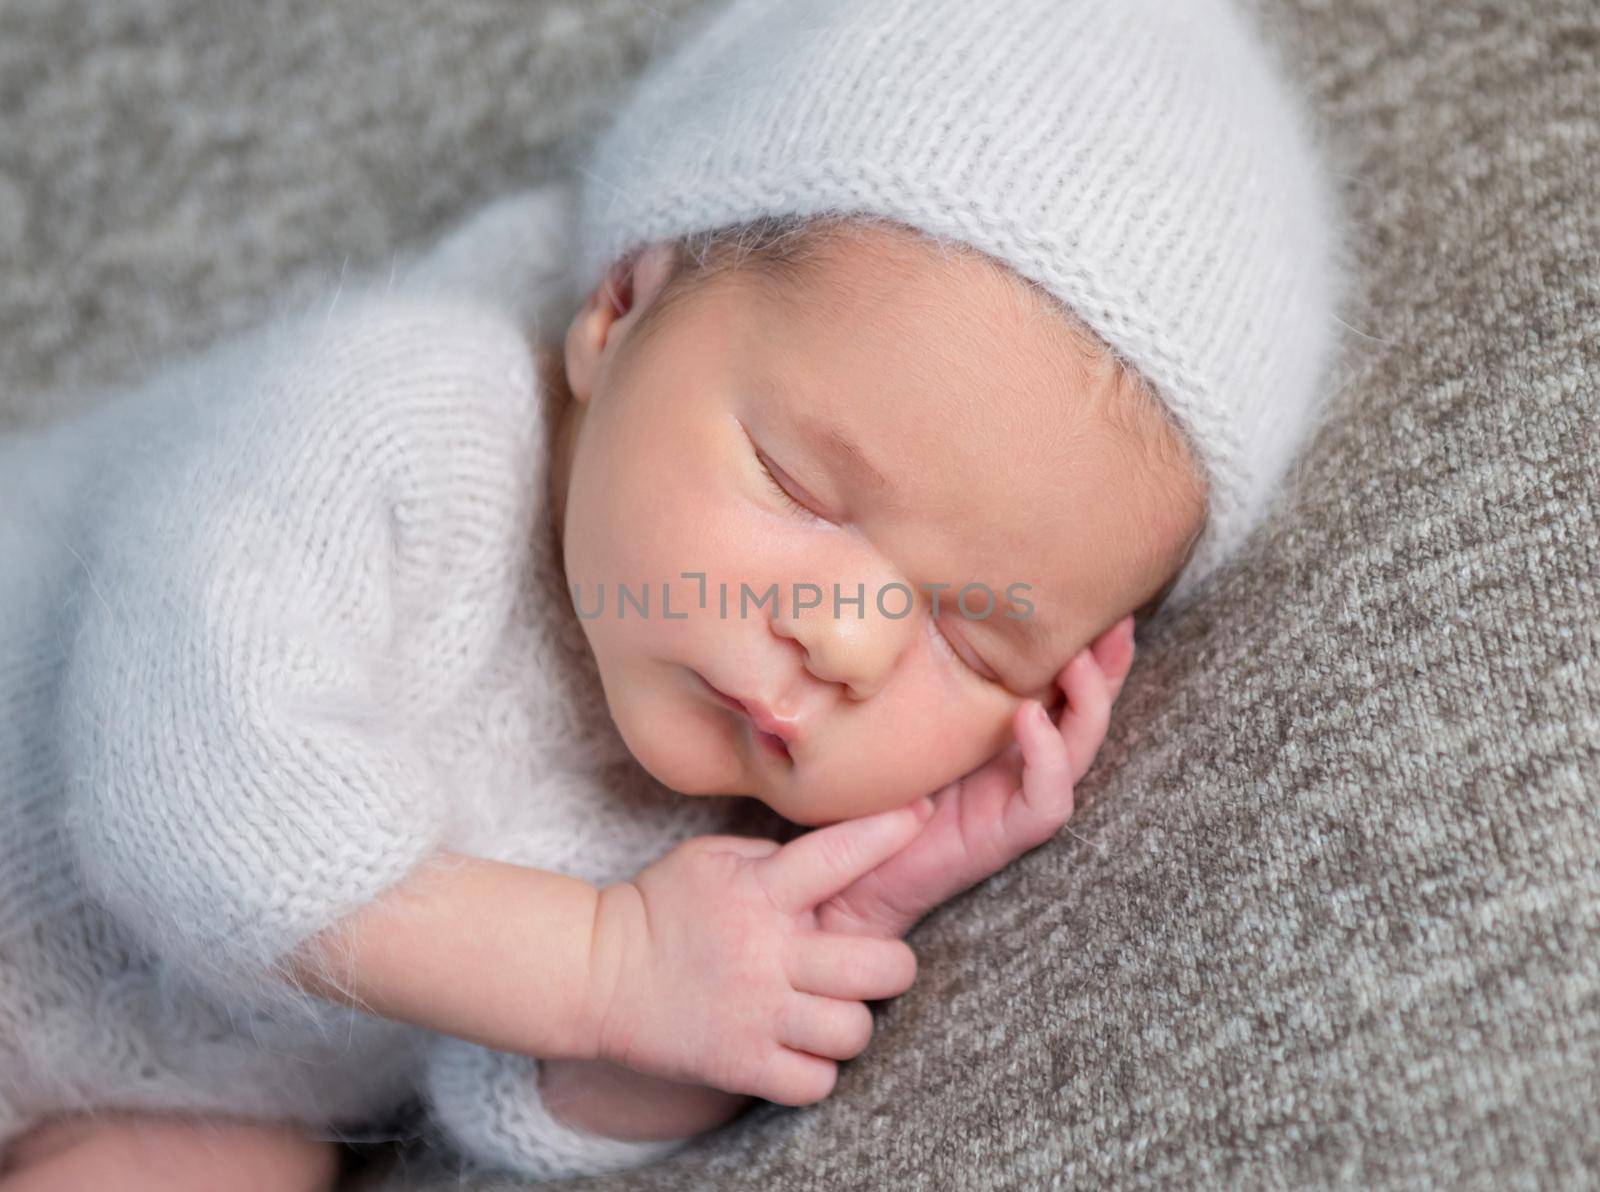 Portrait of newborn baby boy sleeping happily and holding his small handsunder his head. Close-up, grey background.